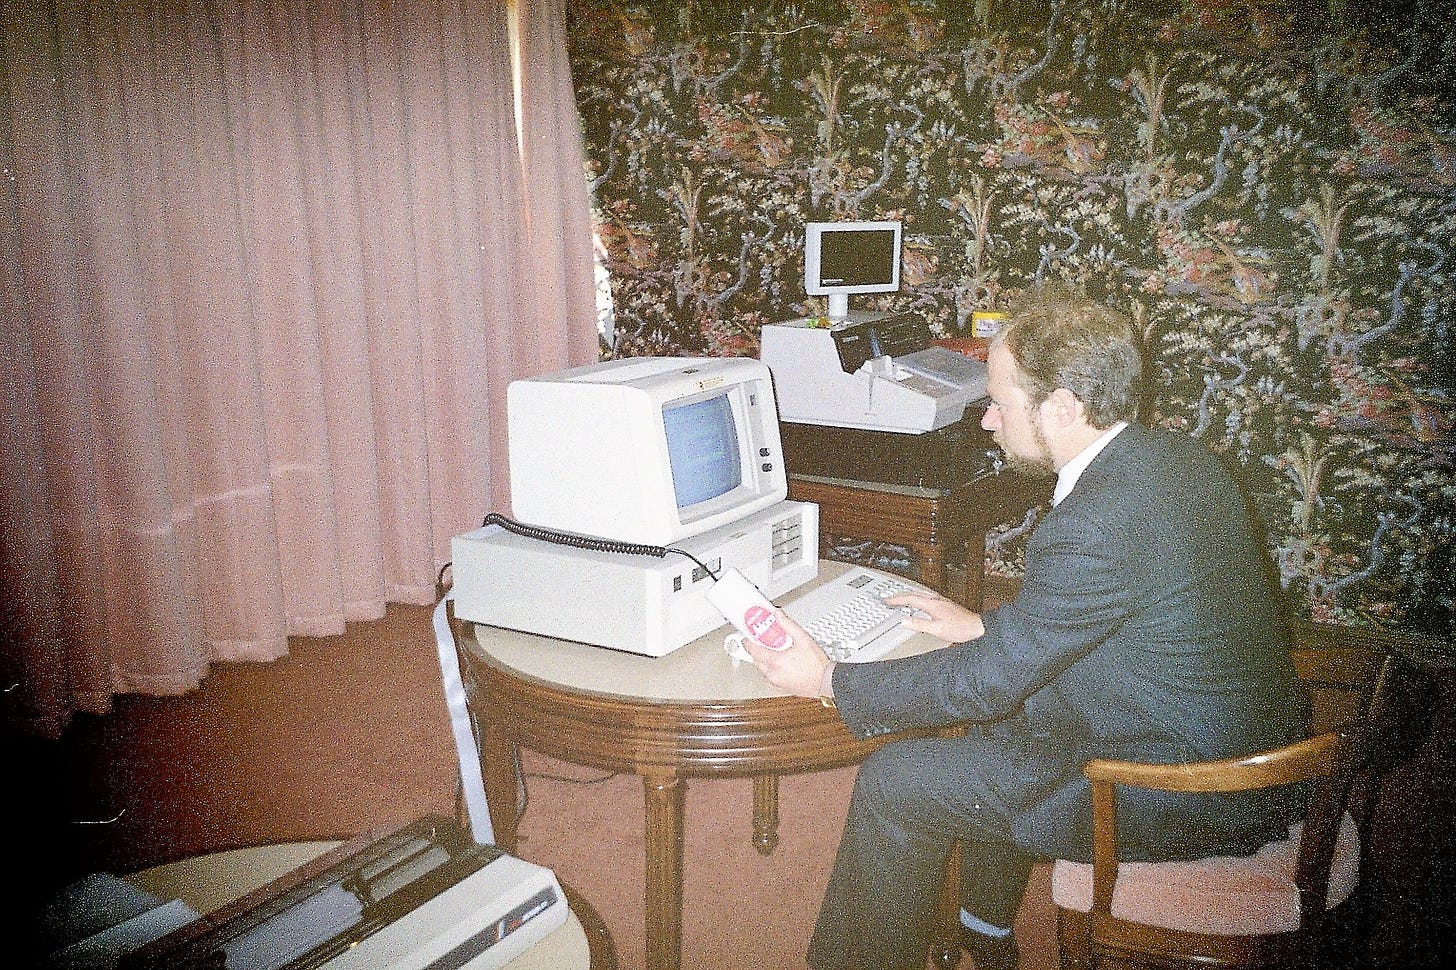 Luigi Cappel, in a suit, typing on an old computer surrounded by pink and flowery curtains.